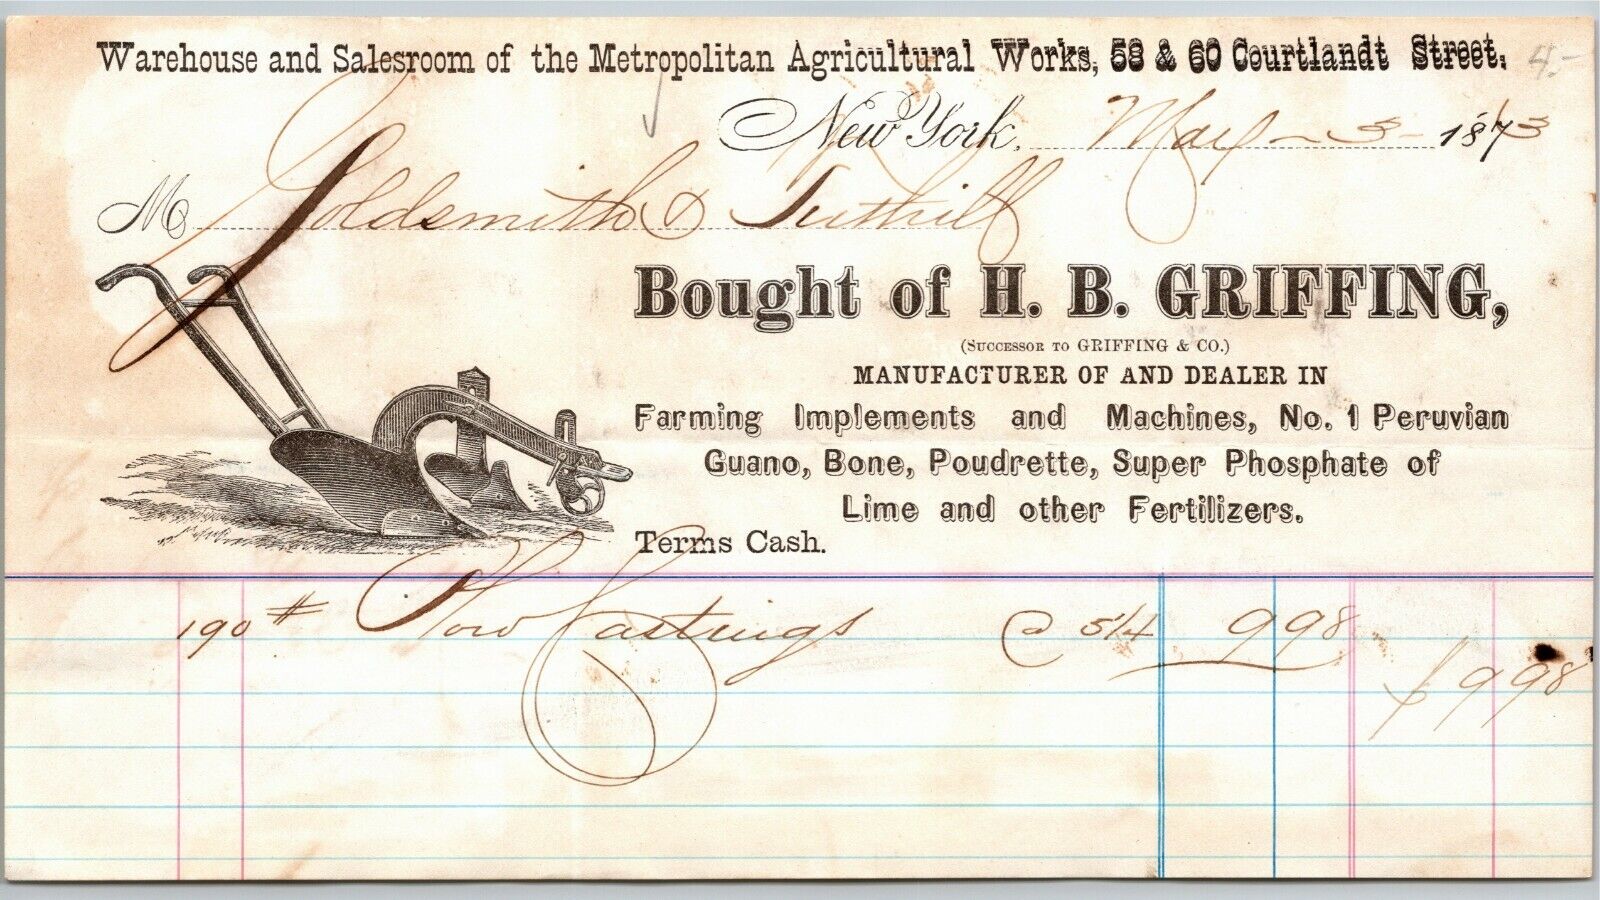 NY, NY Courtland St. 1873 Letterhead Billhead H.B. Griffing Farming Implements